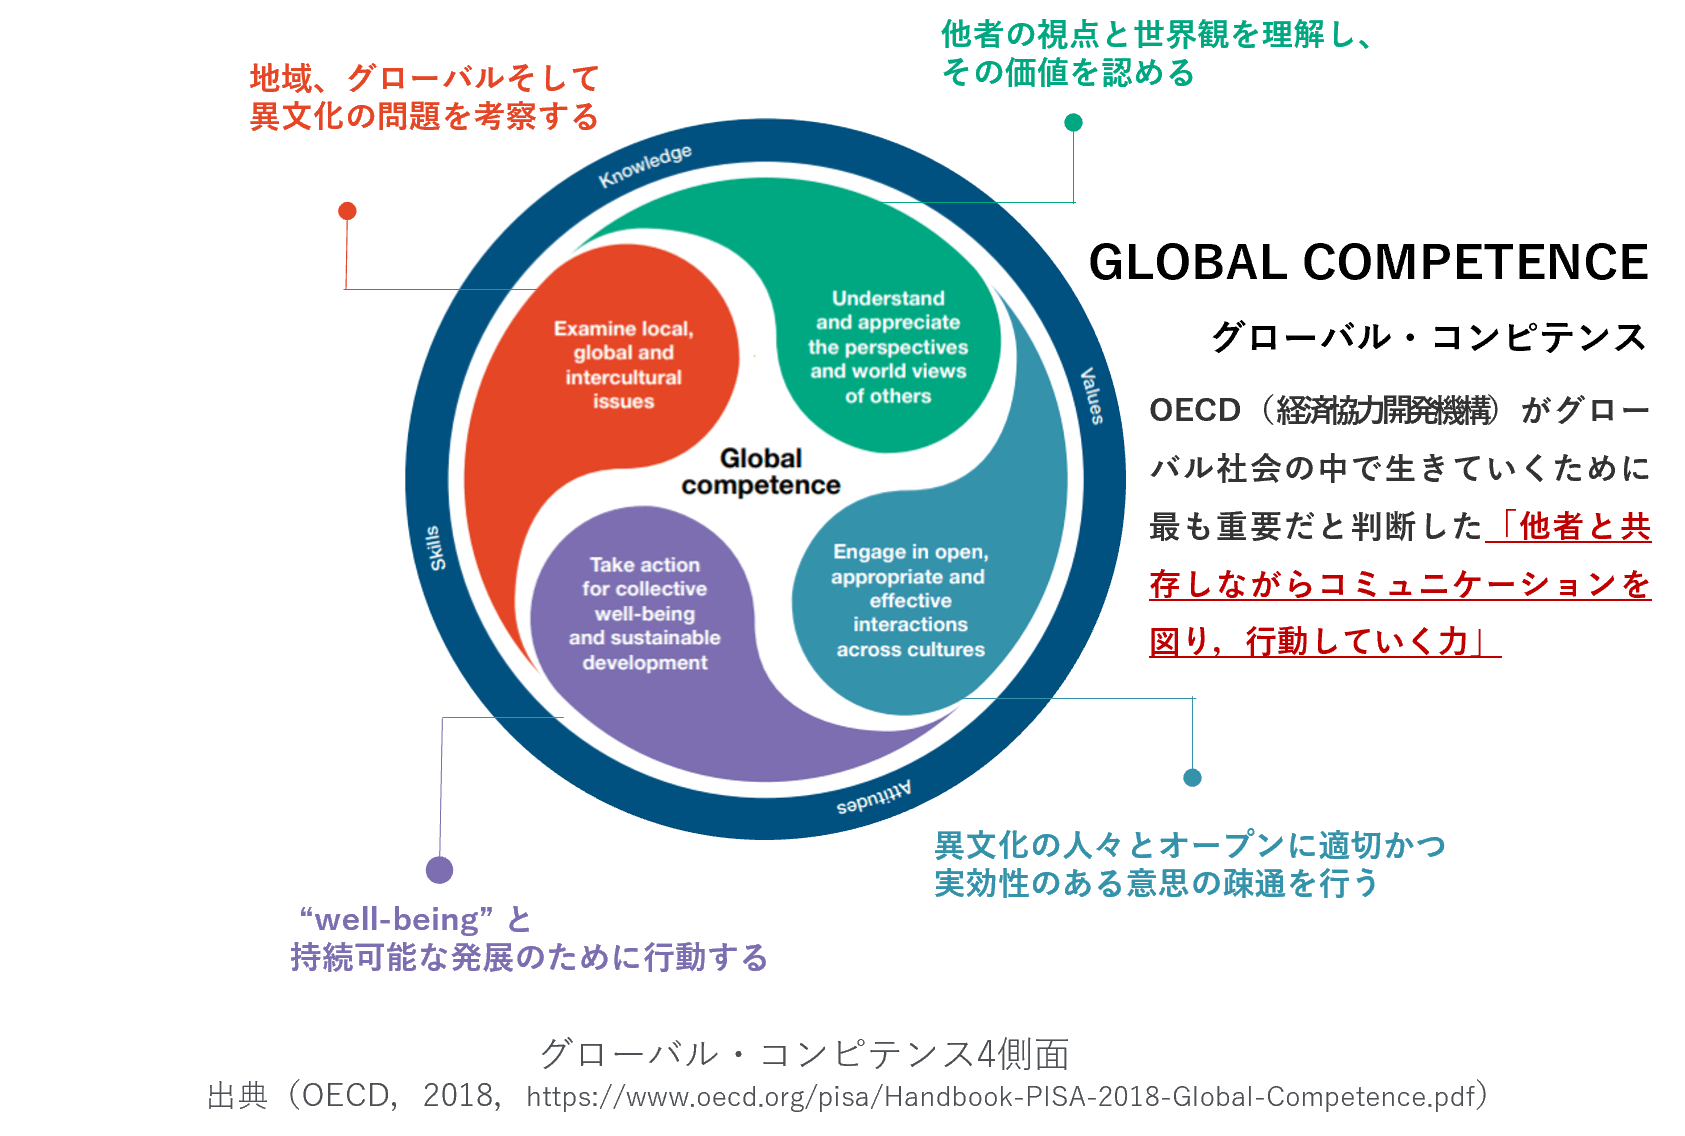 GLOBAL COMPETENCE